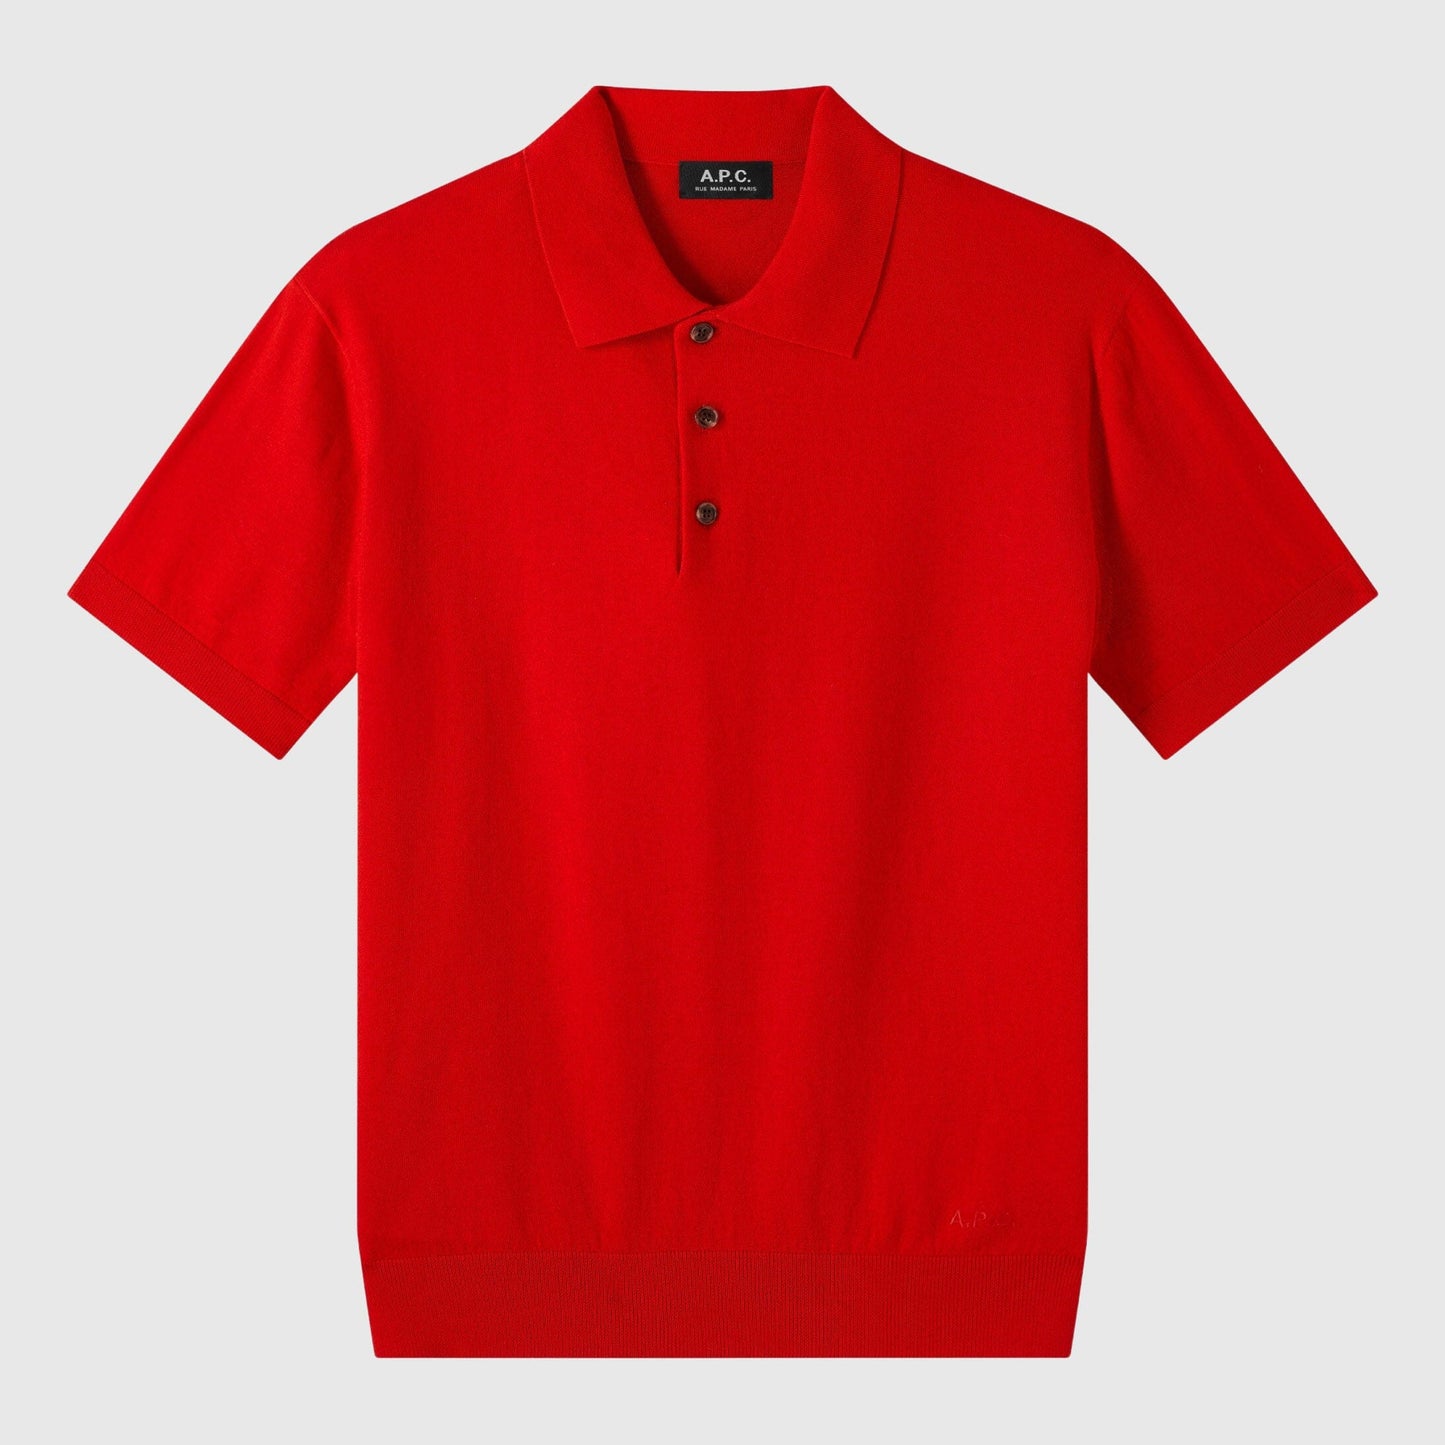 A.P.C Gregoire Polo - Red T-Shirt A.P.C 